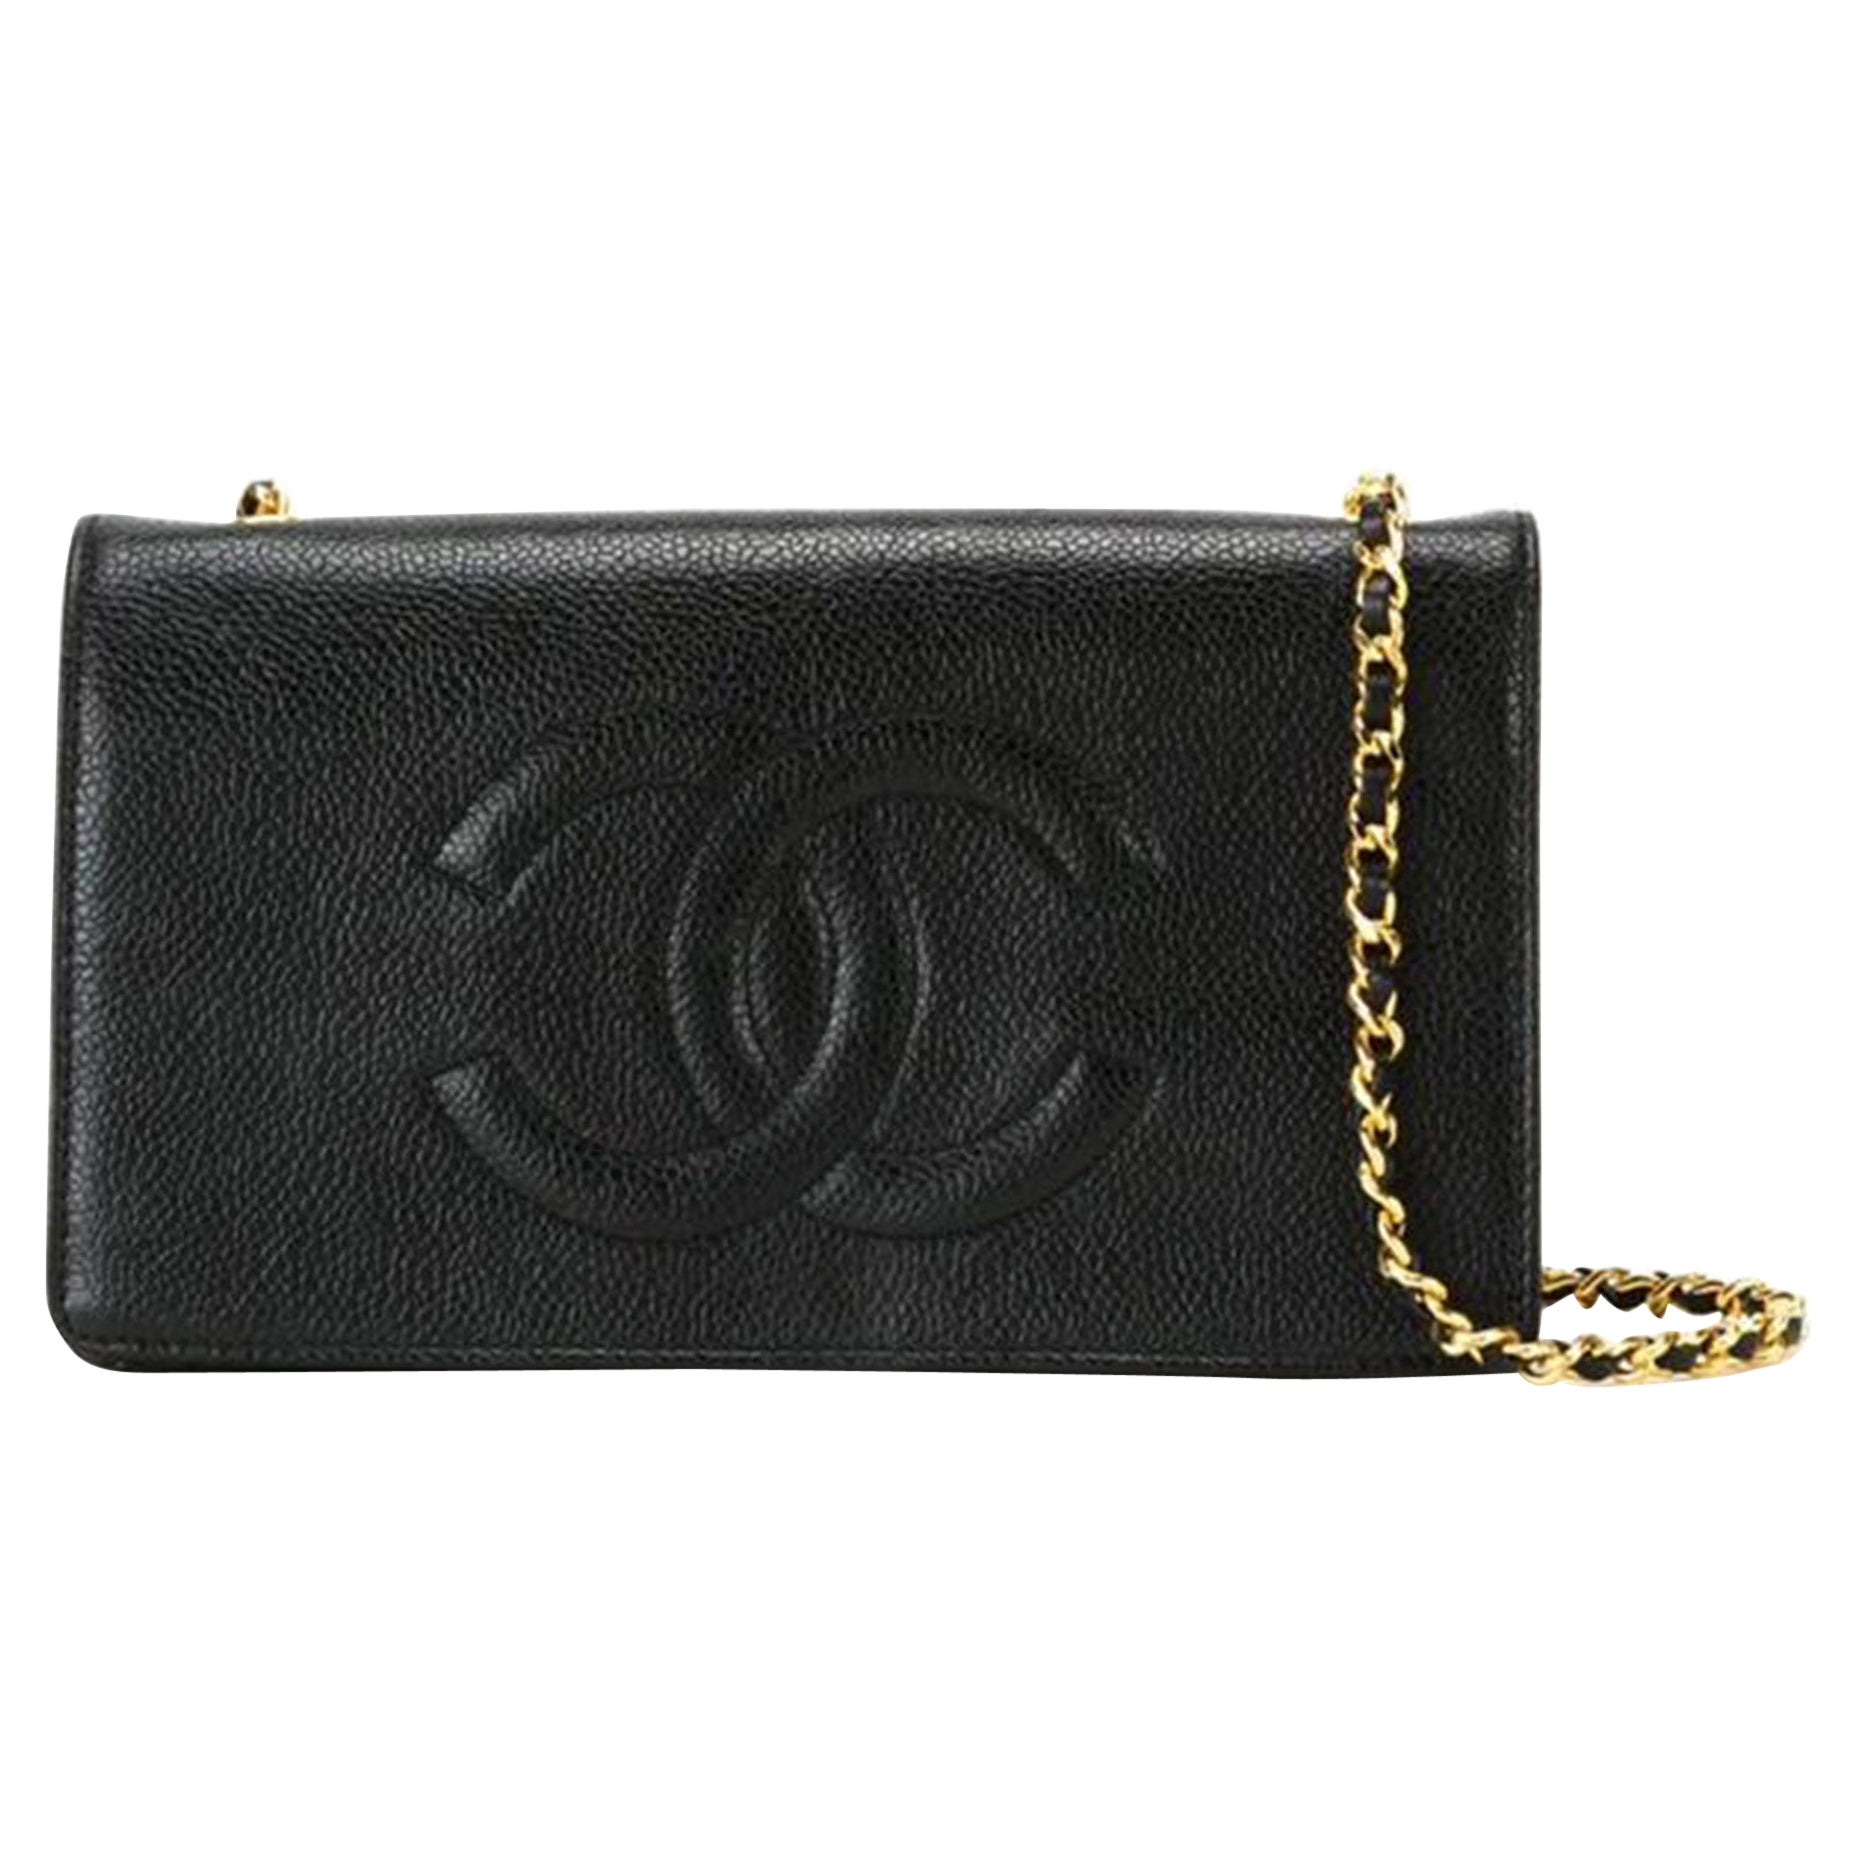 Chanel Vintage 90's Woc Wallet on A Chain Black Calfskin Leather Cross Body Bag